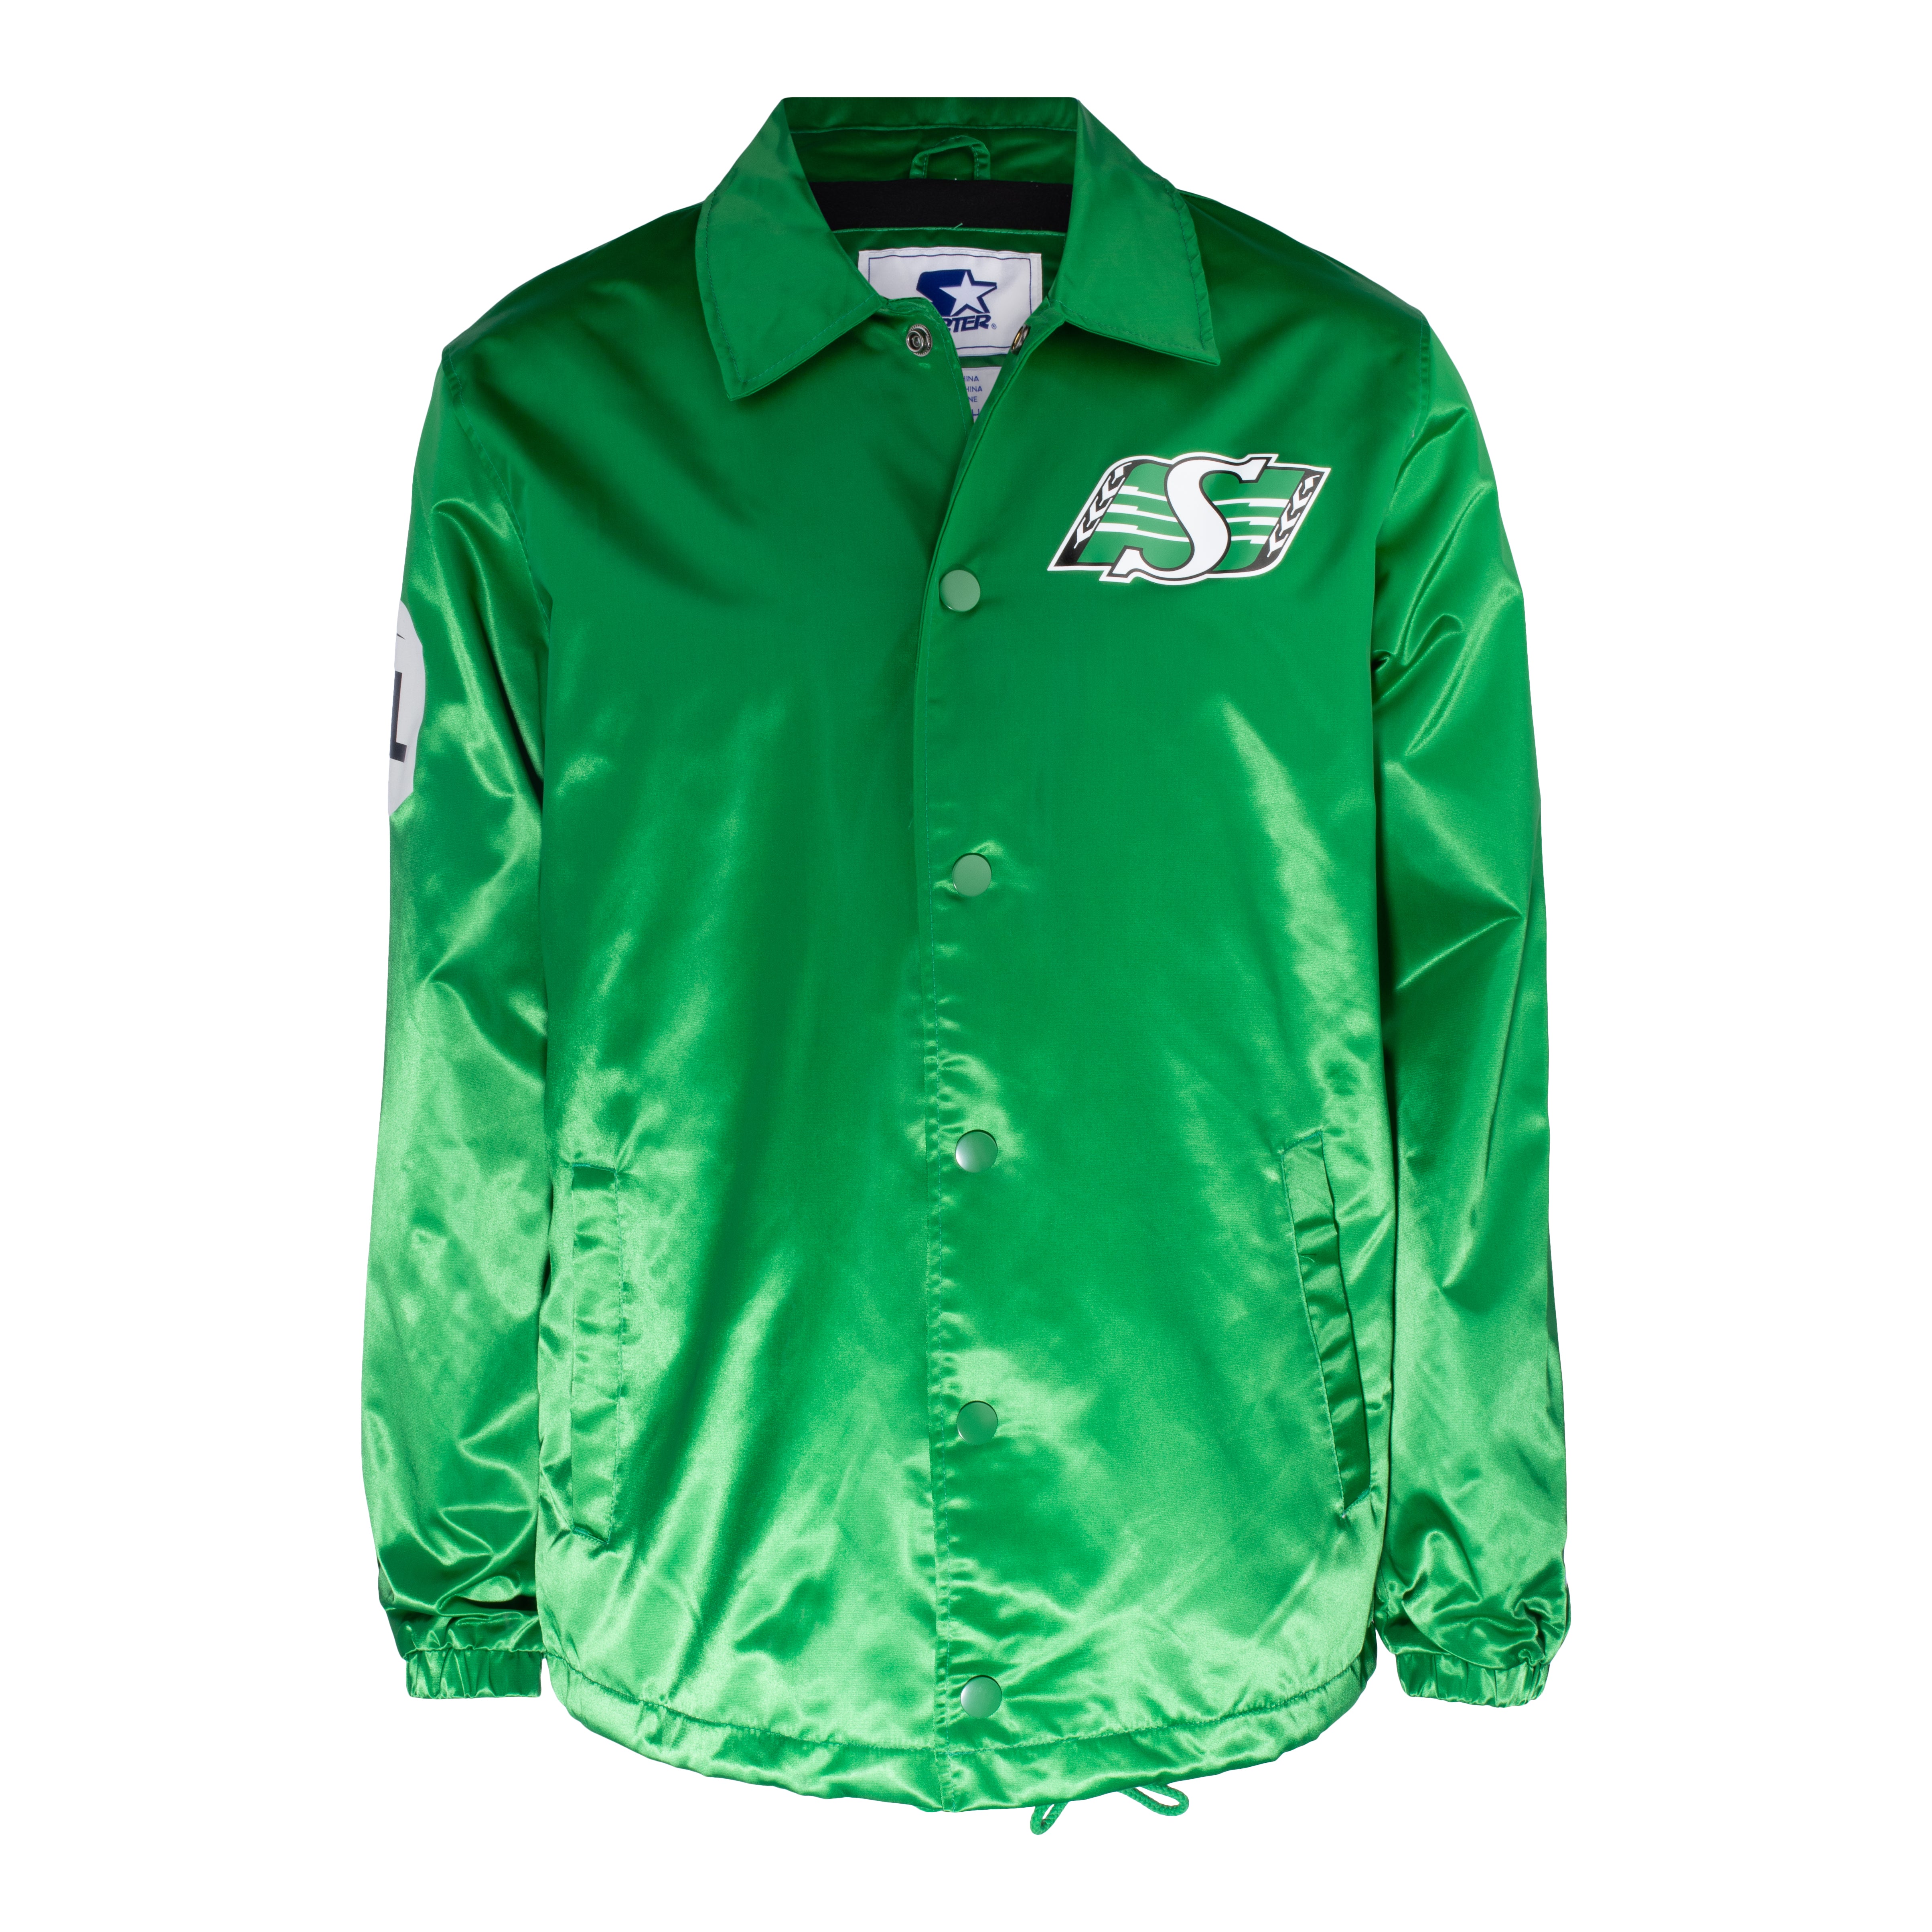 Sideline Option Route Coaches Jacket Green